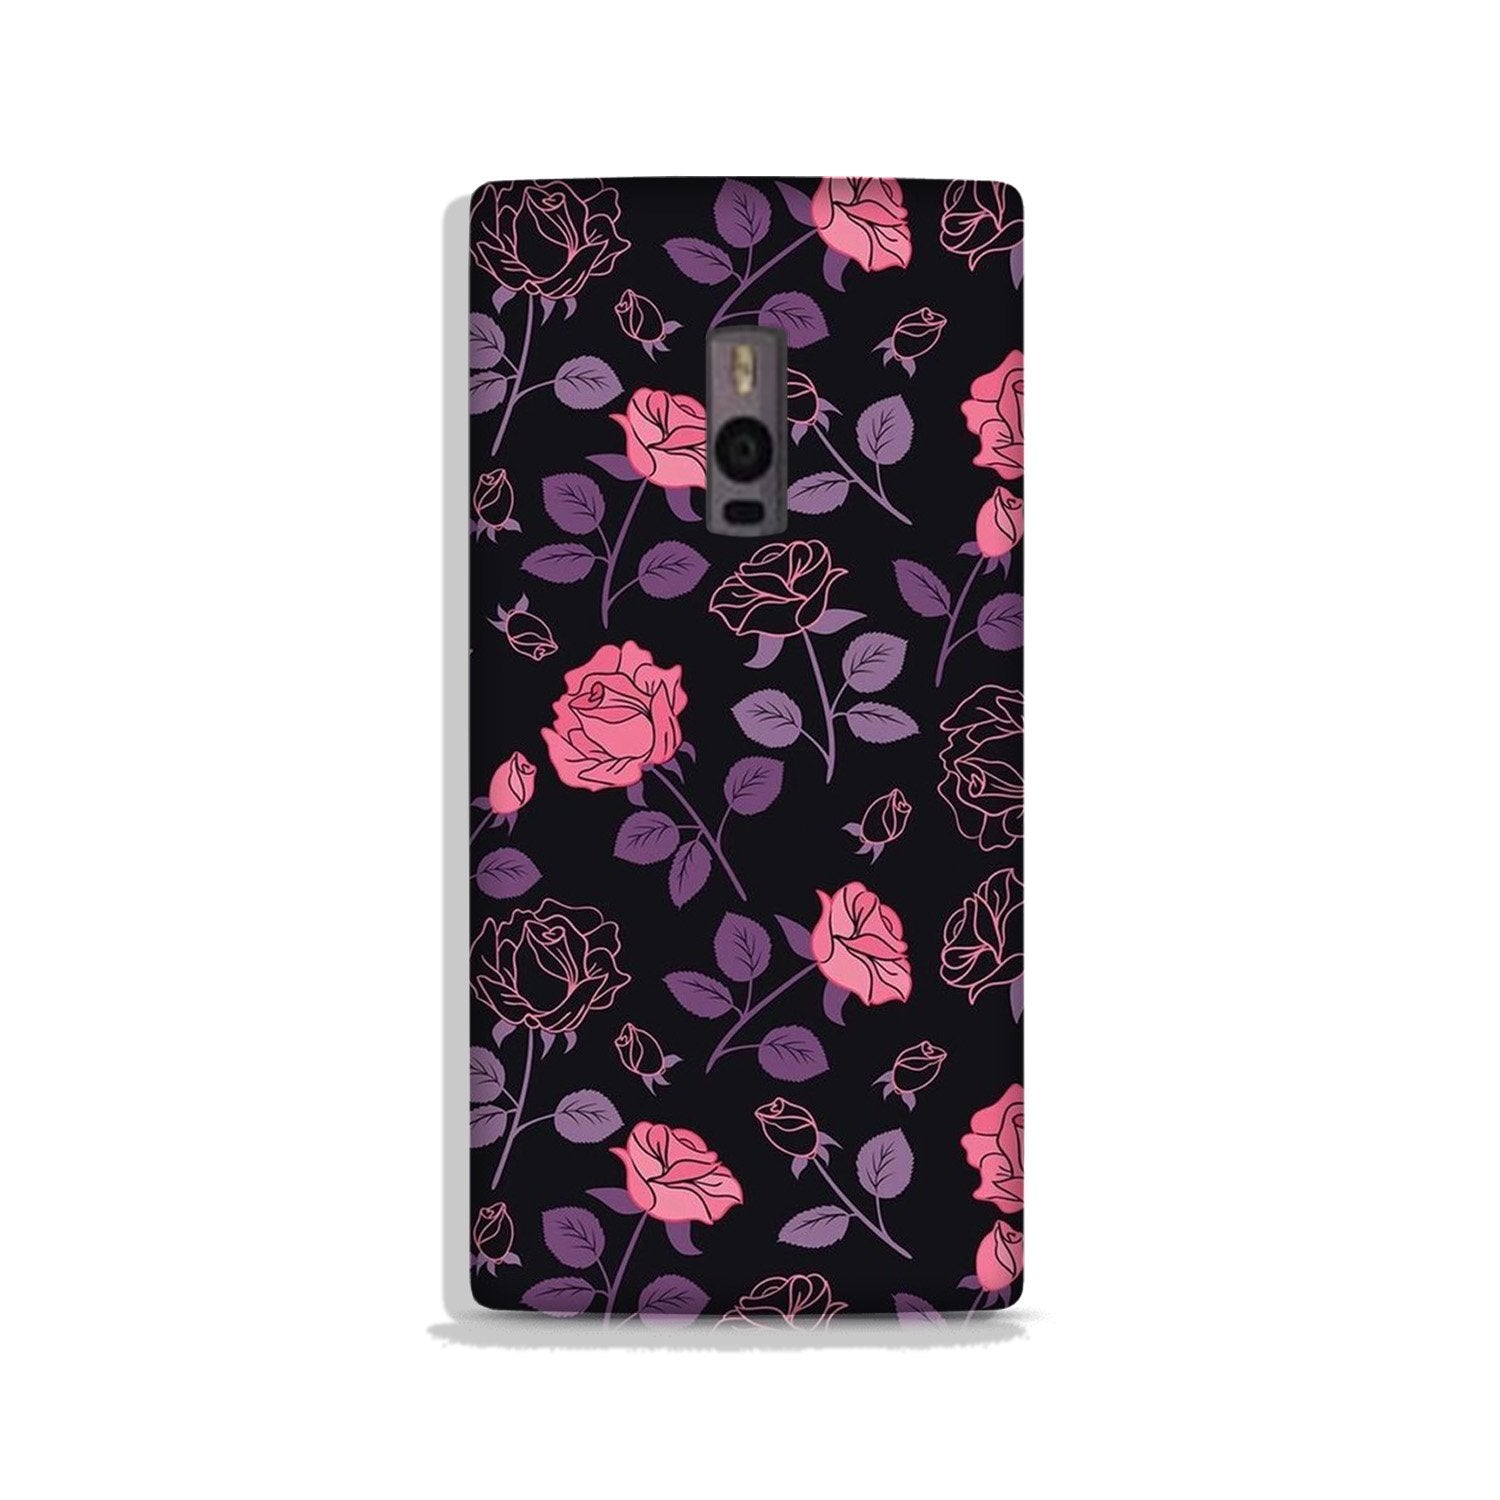 Rose Black Background Case for OnePlus 2